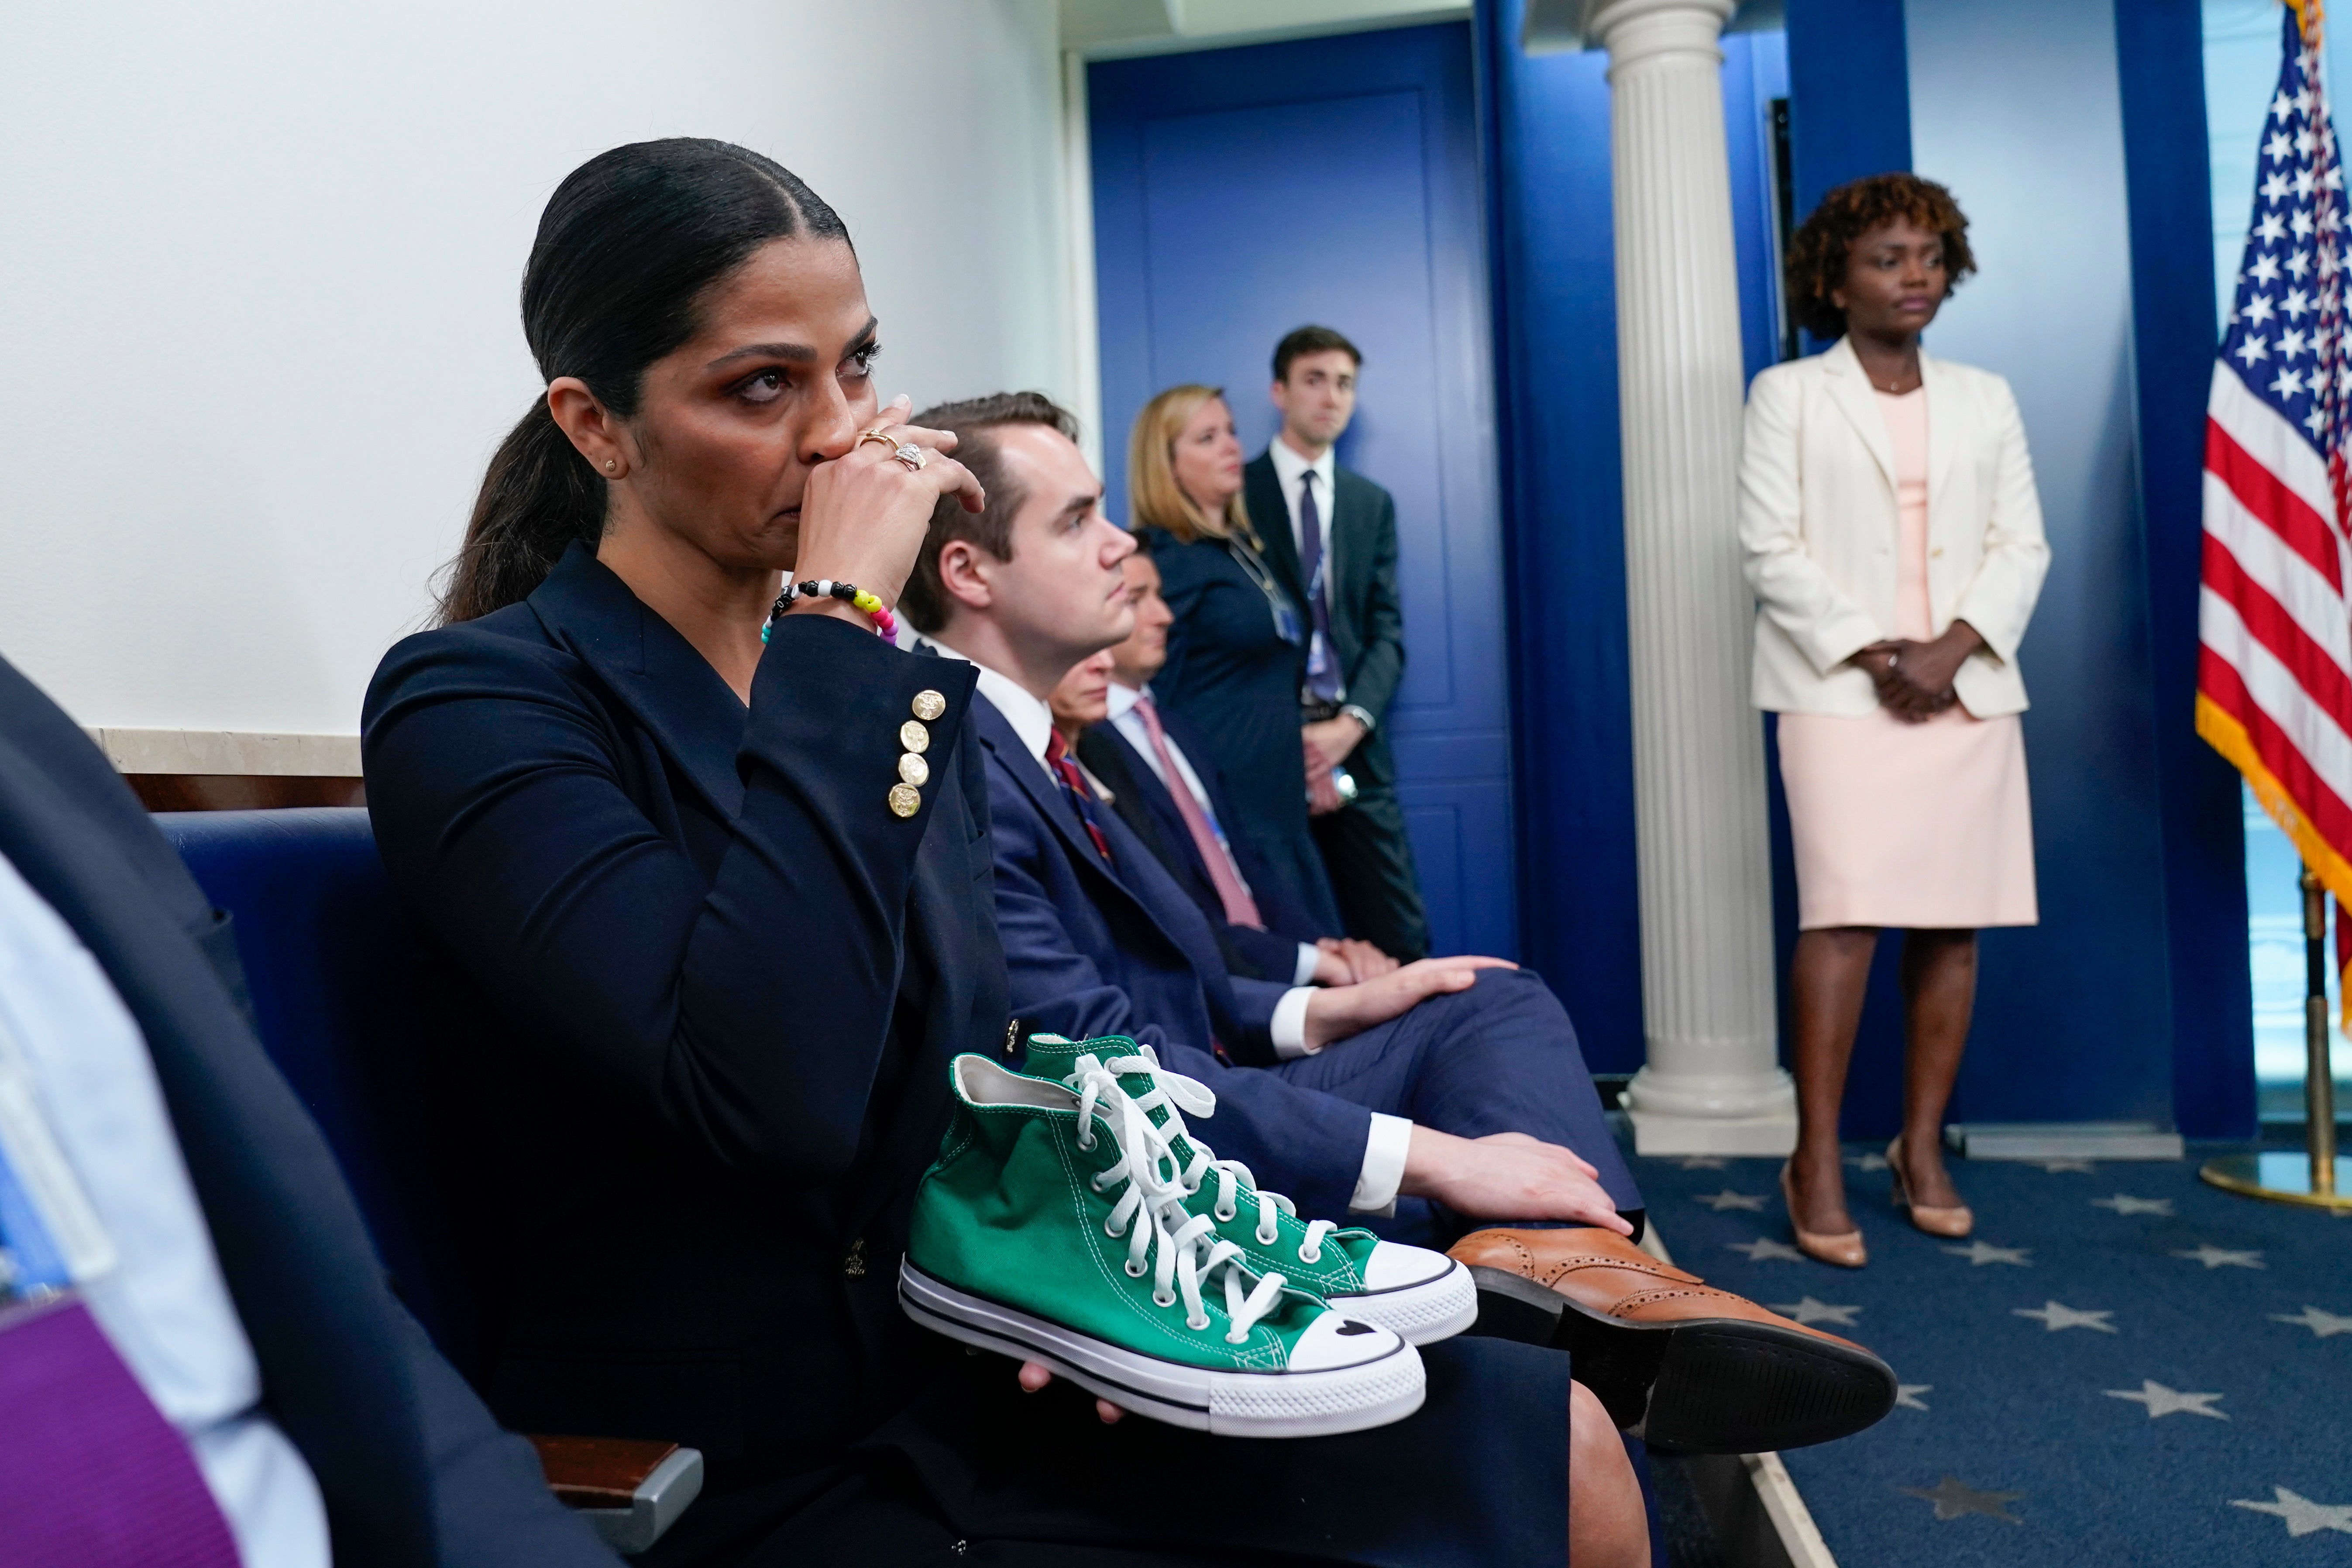 Camila Alves McConaughey holds the lime green Converse tennis shoes that were worn by Uvalde shooting victim Maite Yuleana Rodriguez, 10